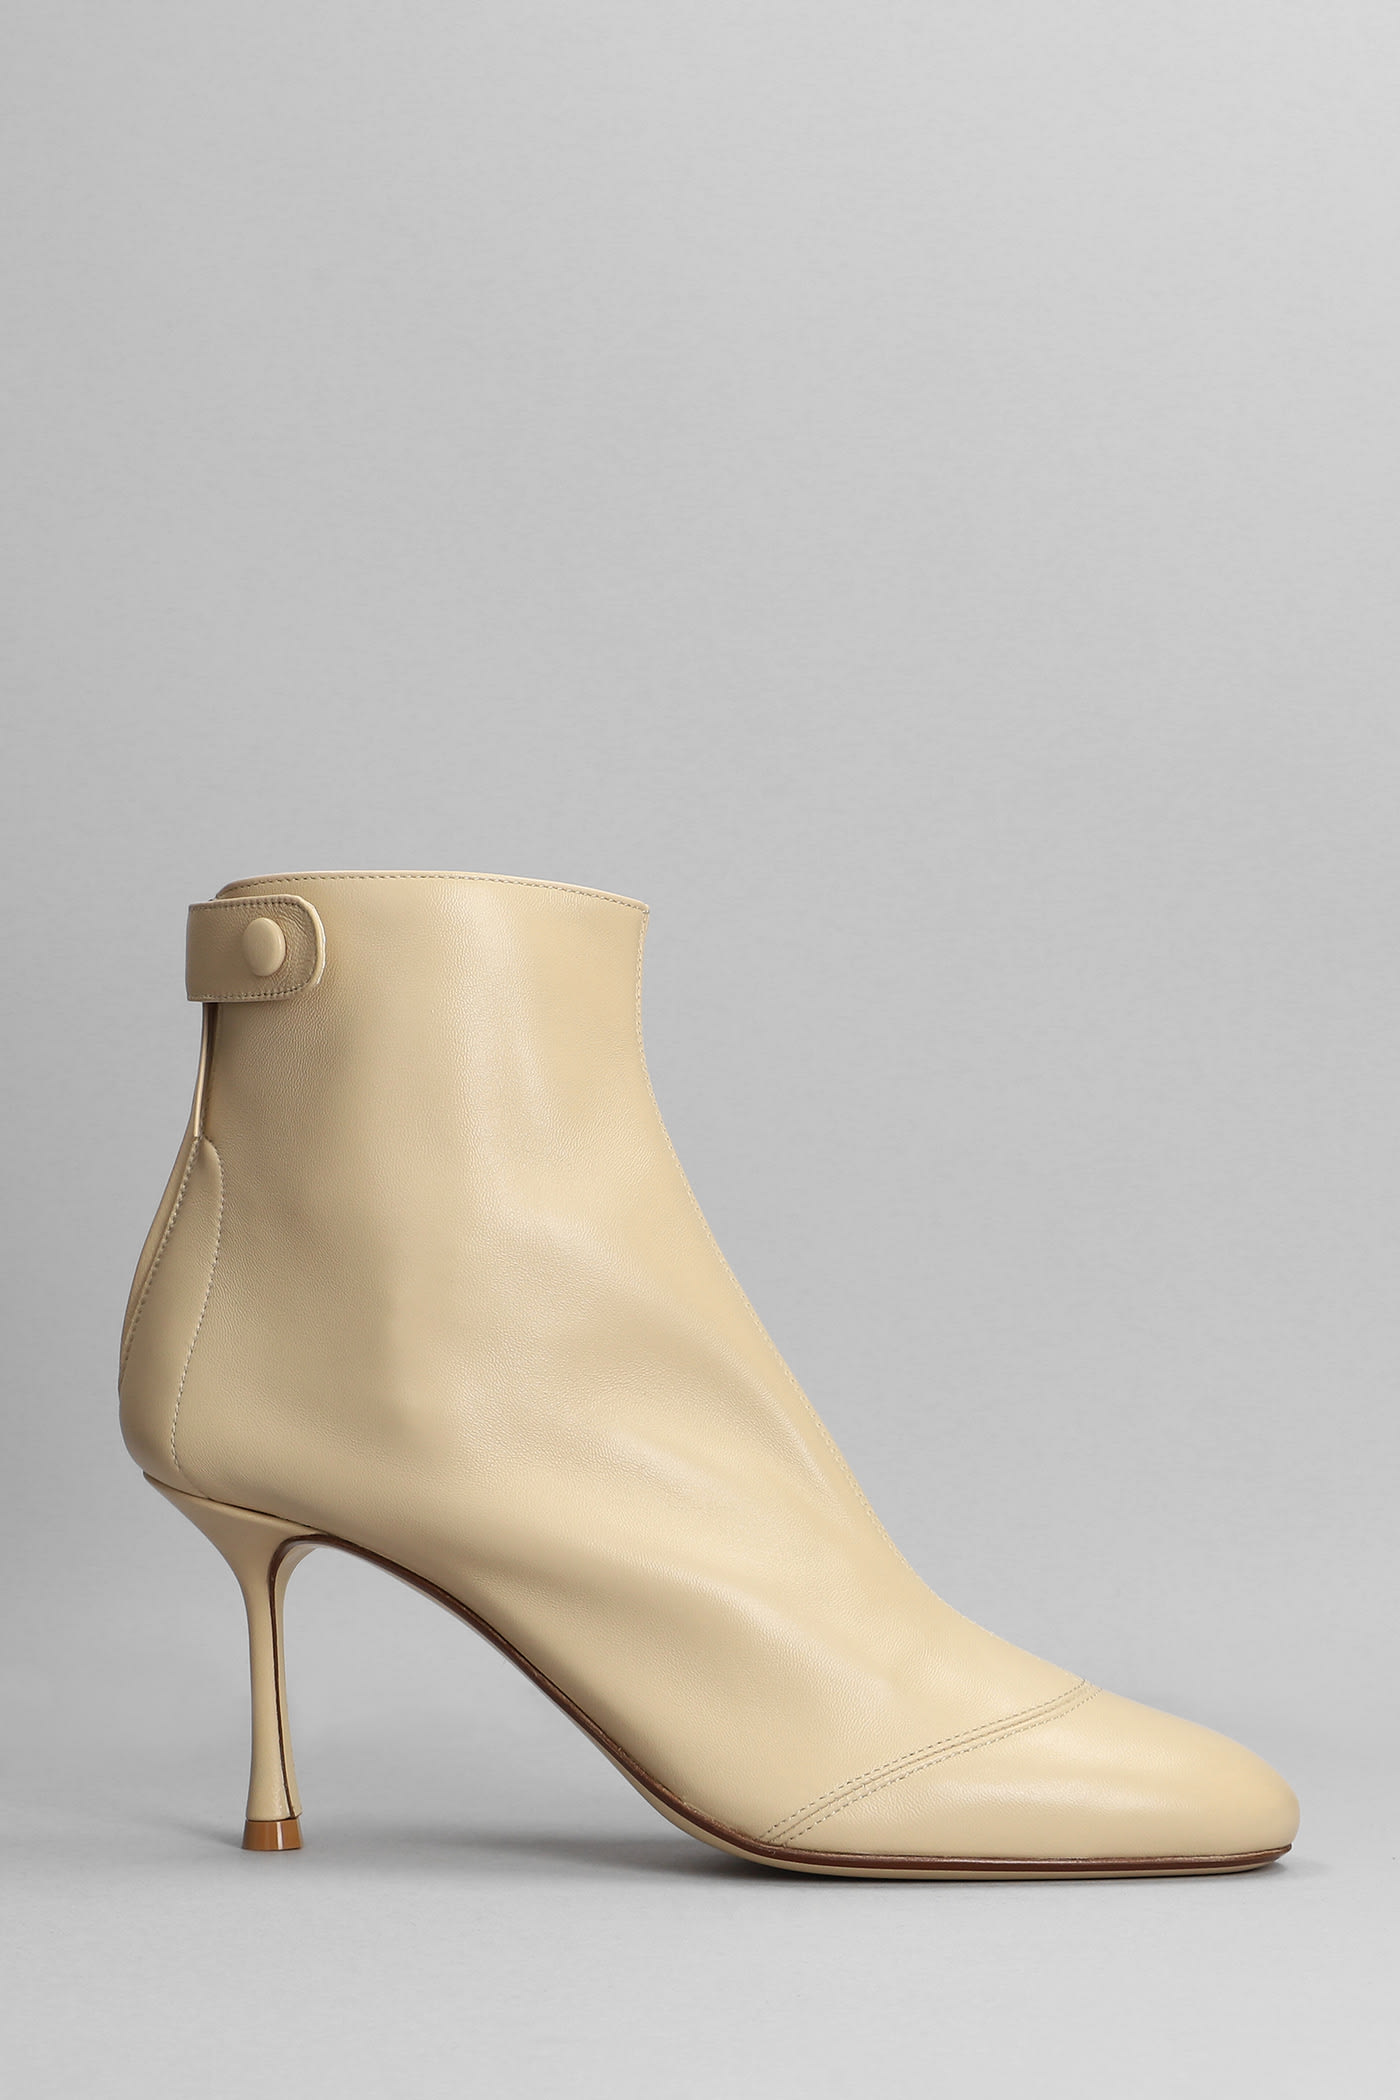 Francesco Russo High Heels Ankle Boots In Beige Leather